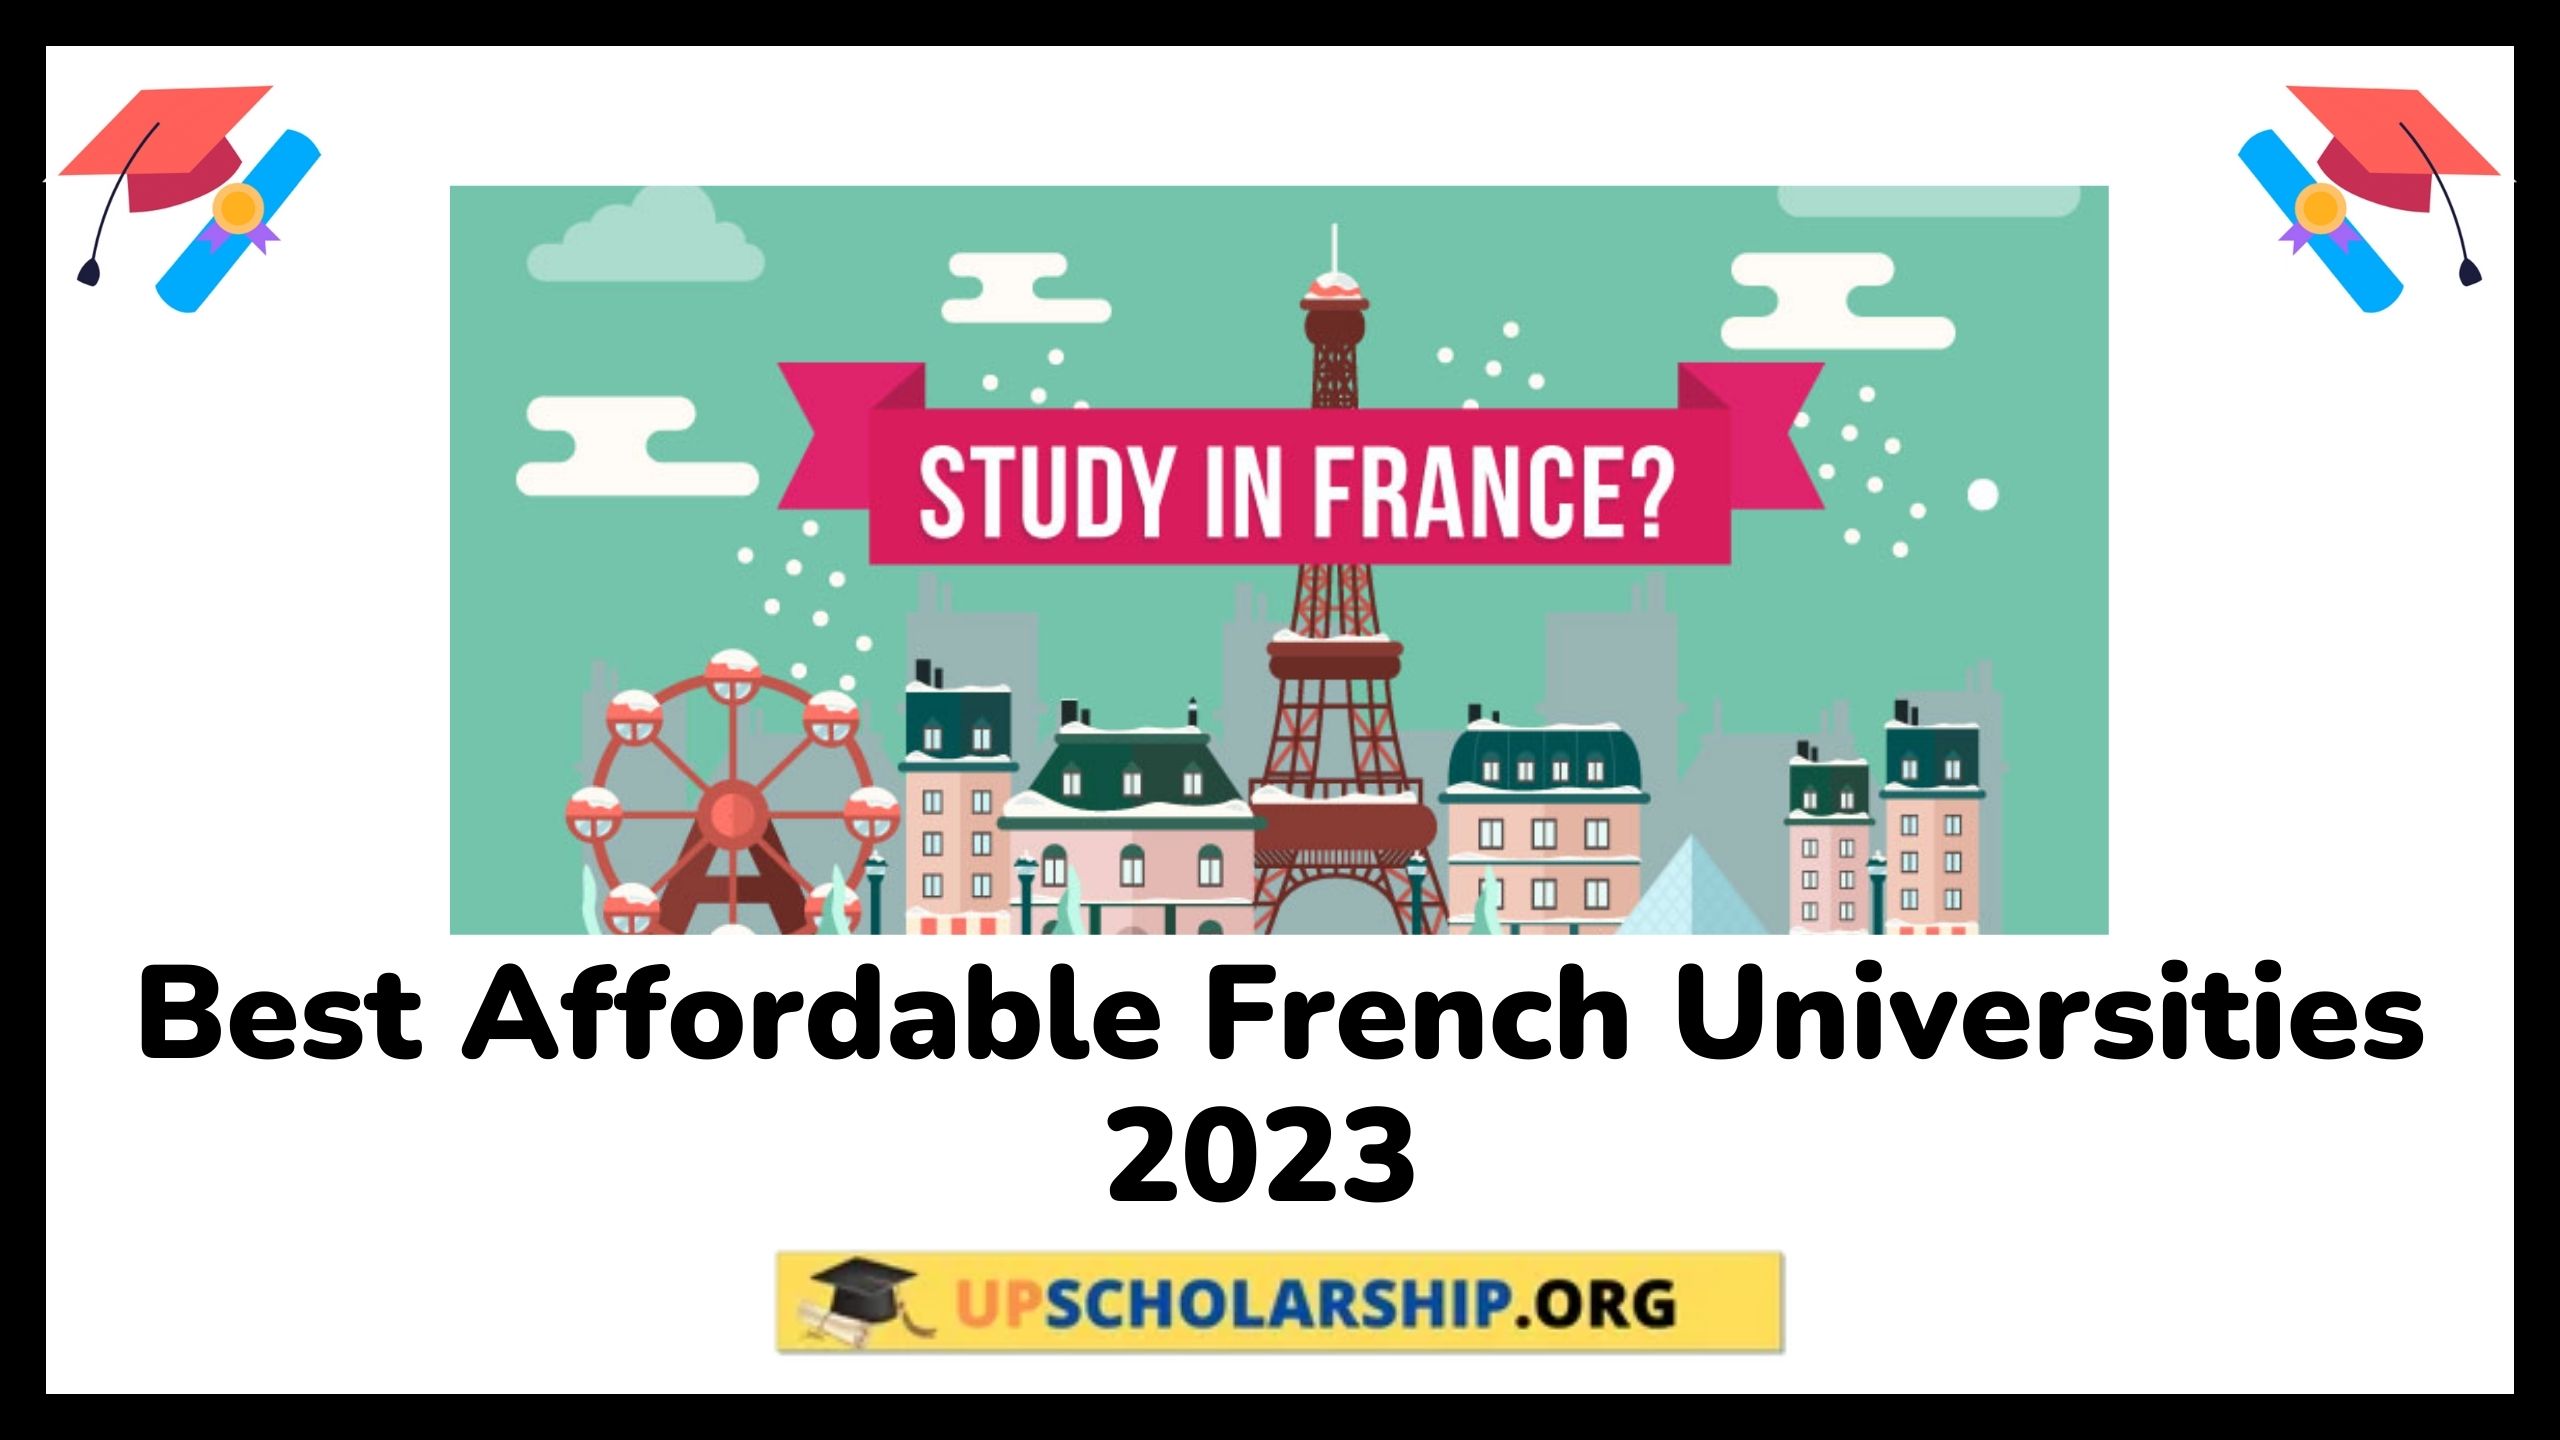 Best Affordable French Universities 2023